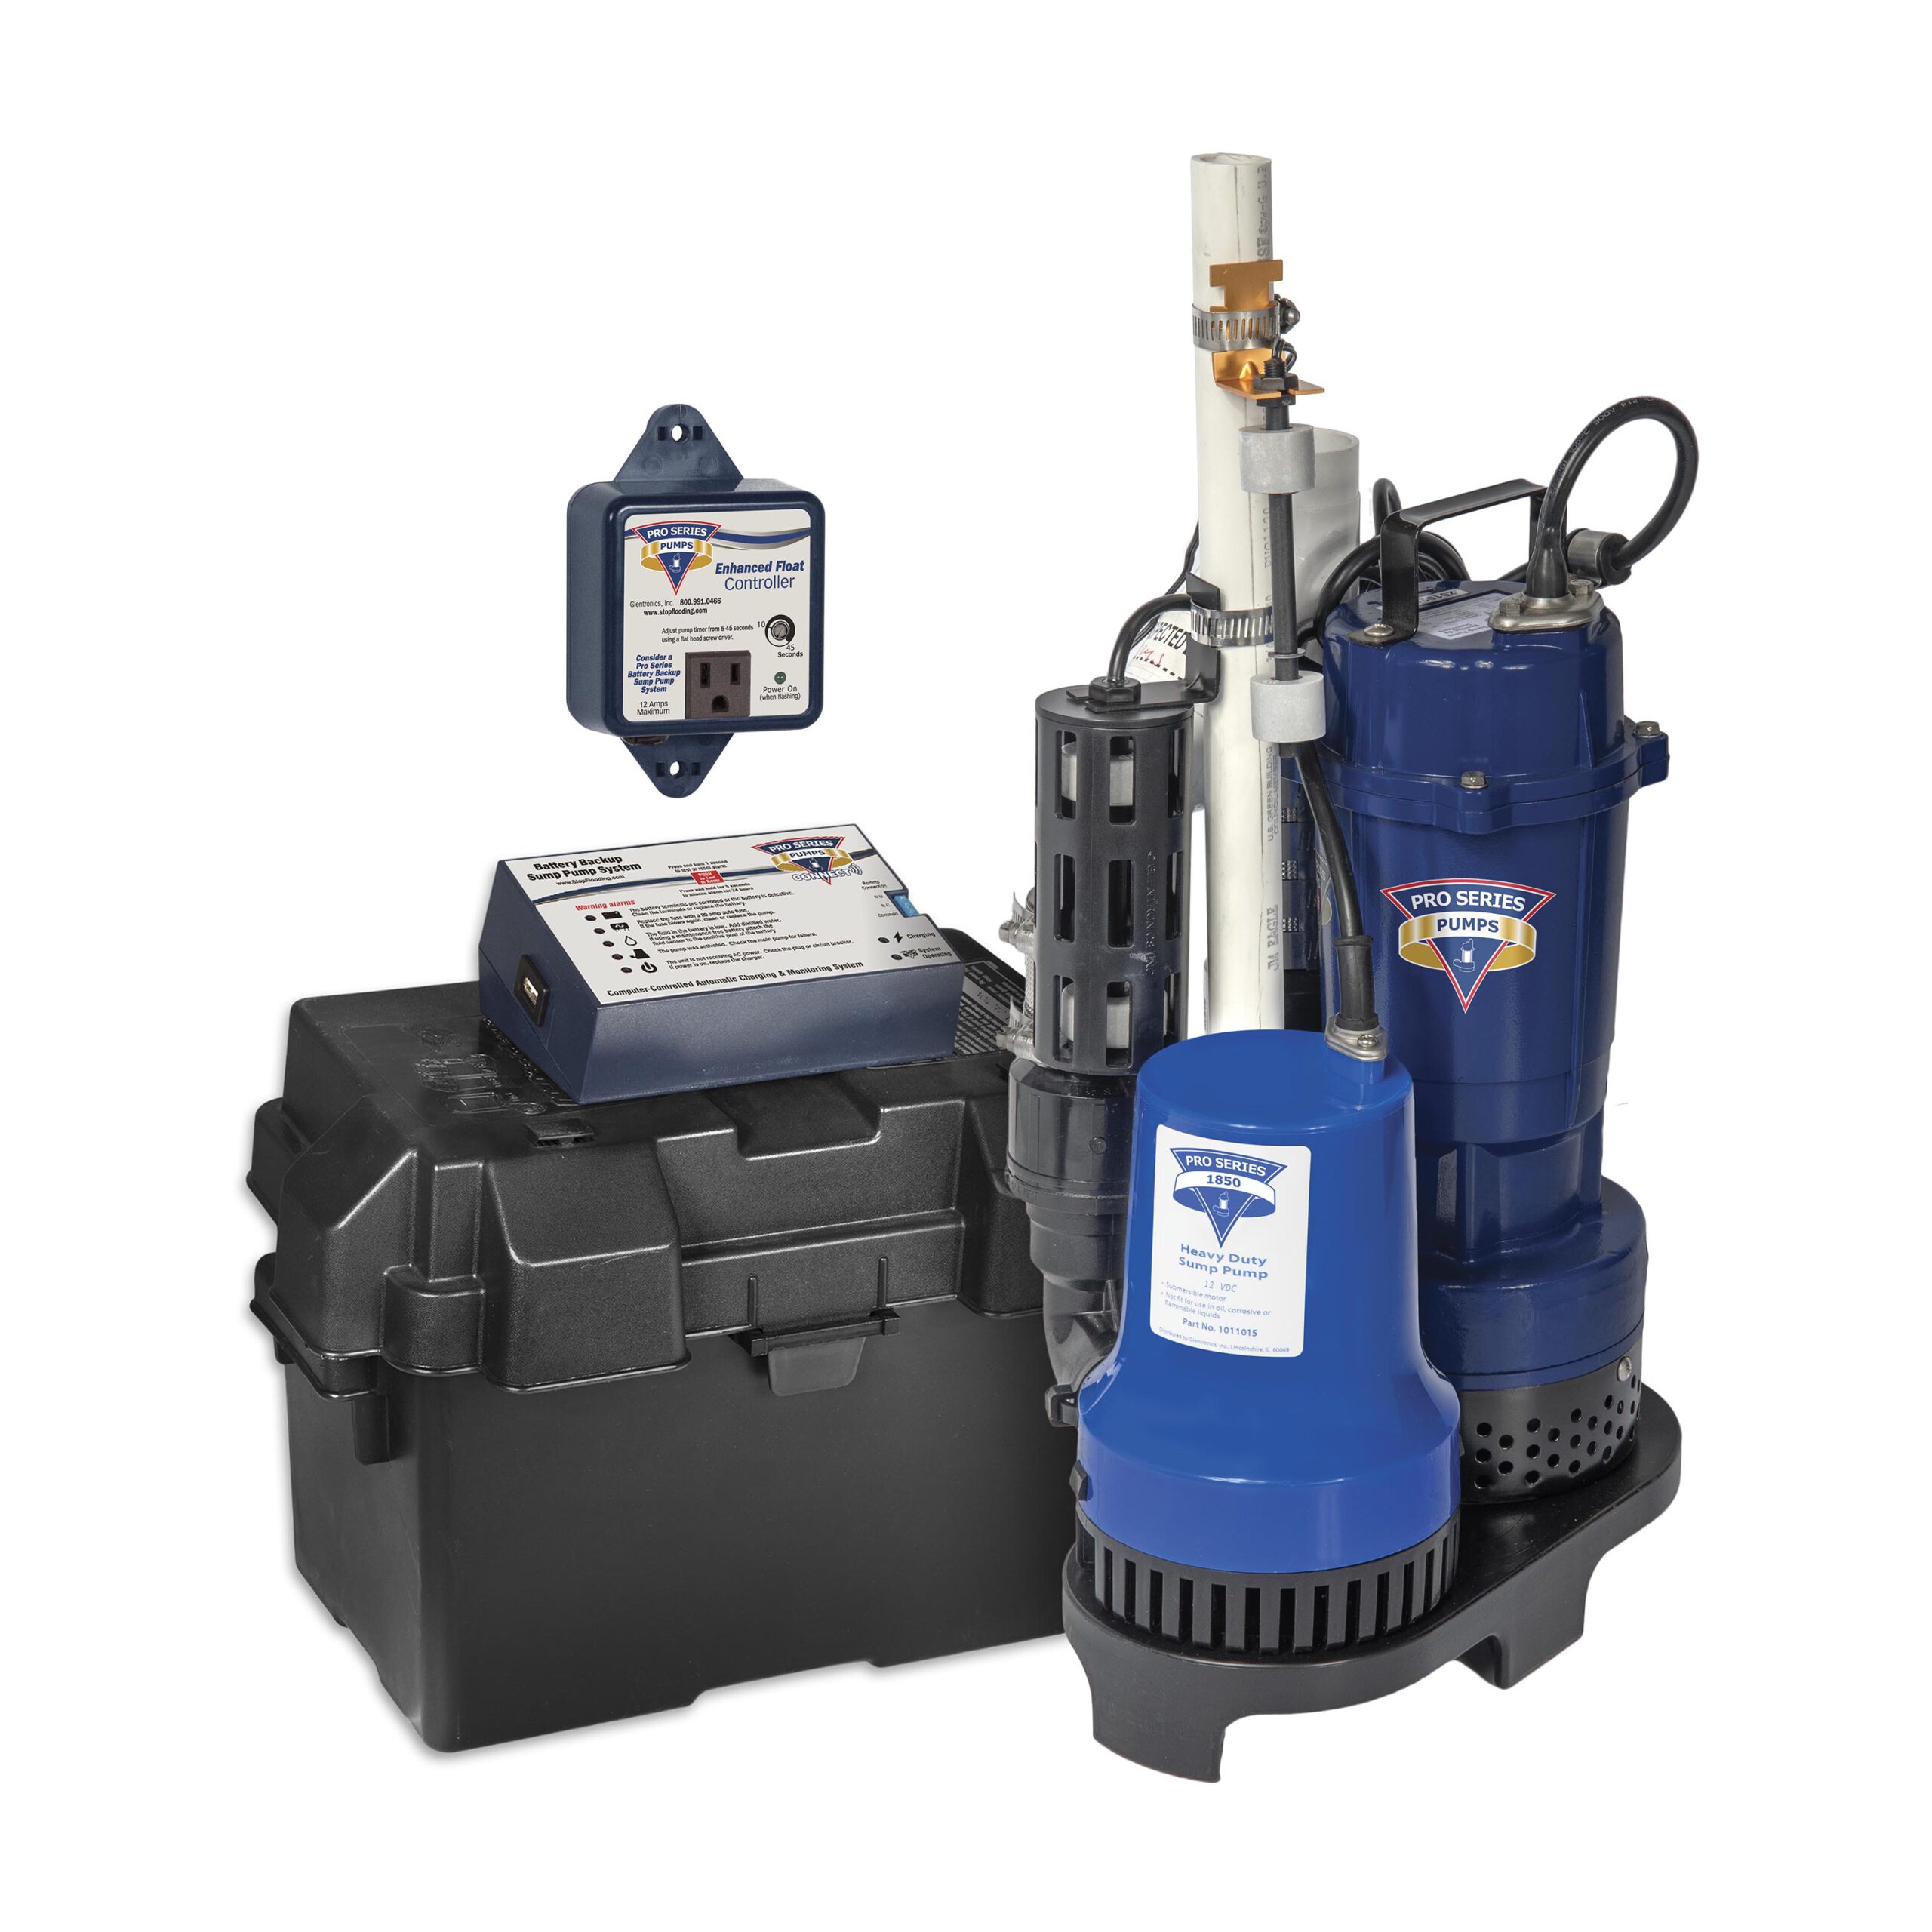 PS-C22 Combination Backup and Primary Pump